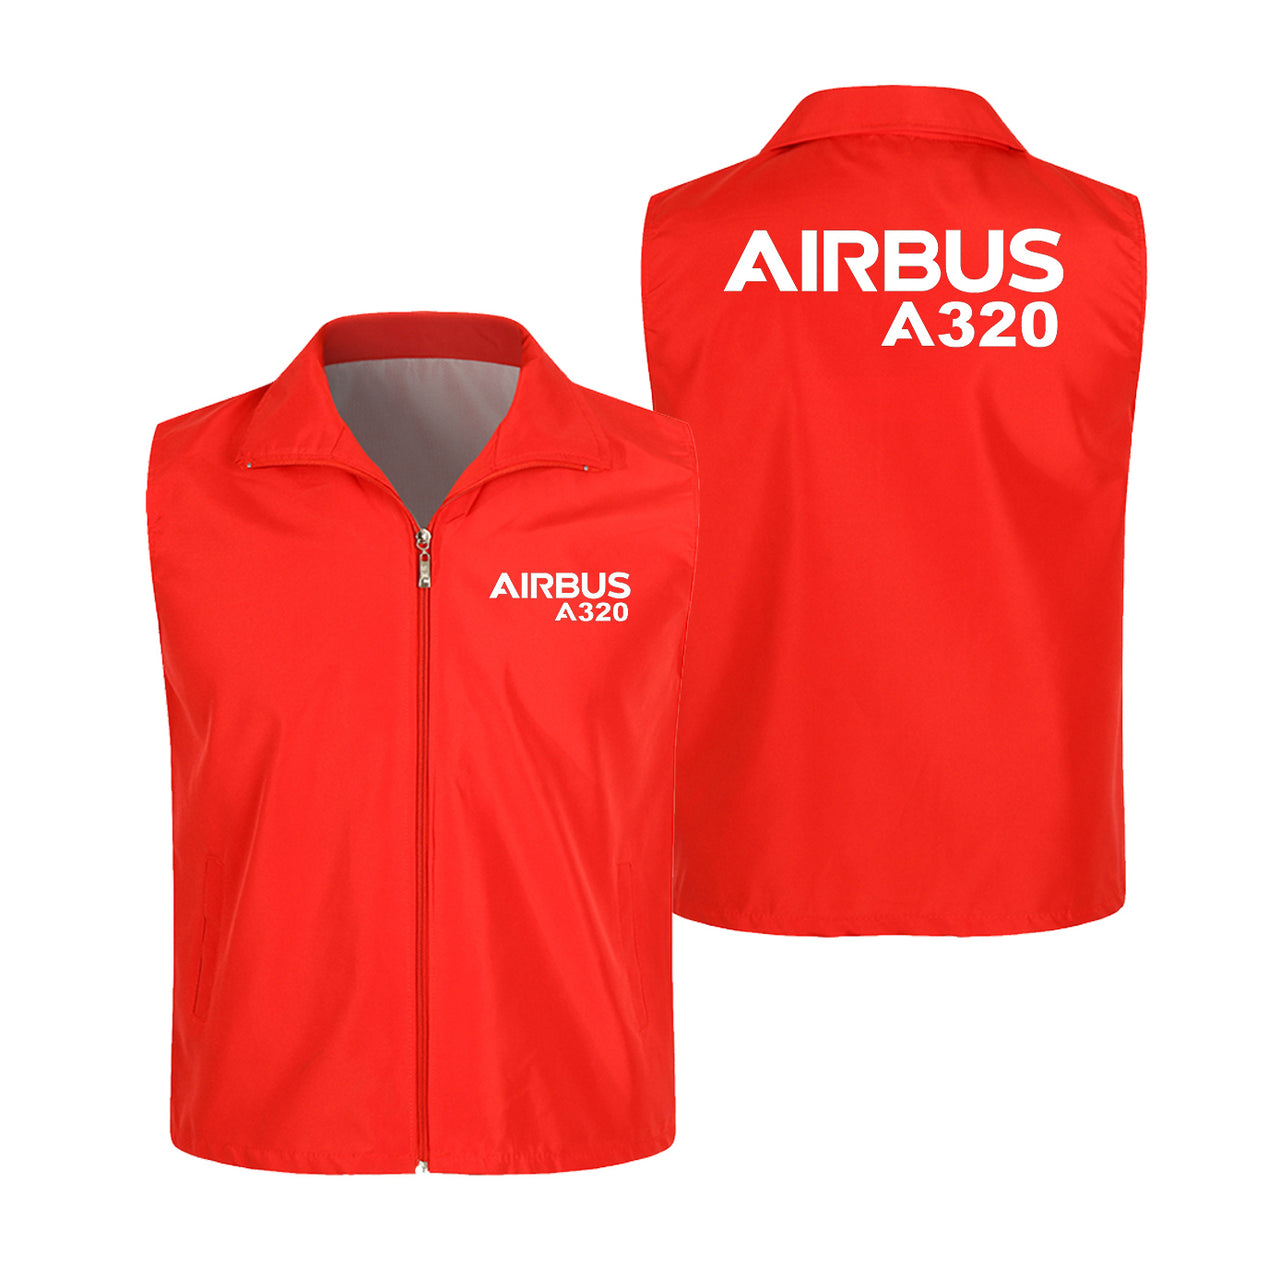 Airbus A320 & Text Designed Thin Style Vests